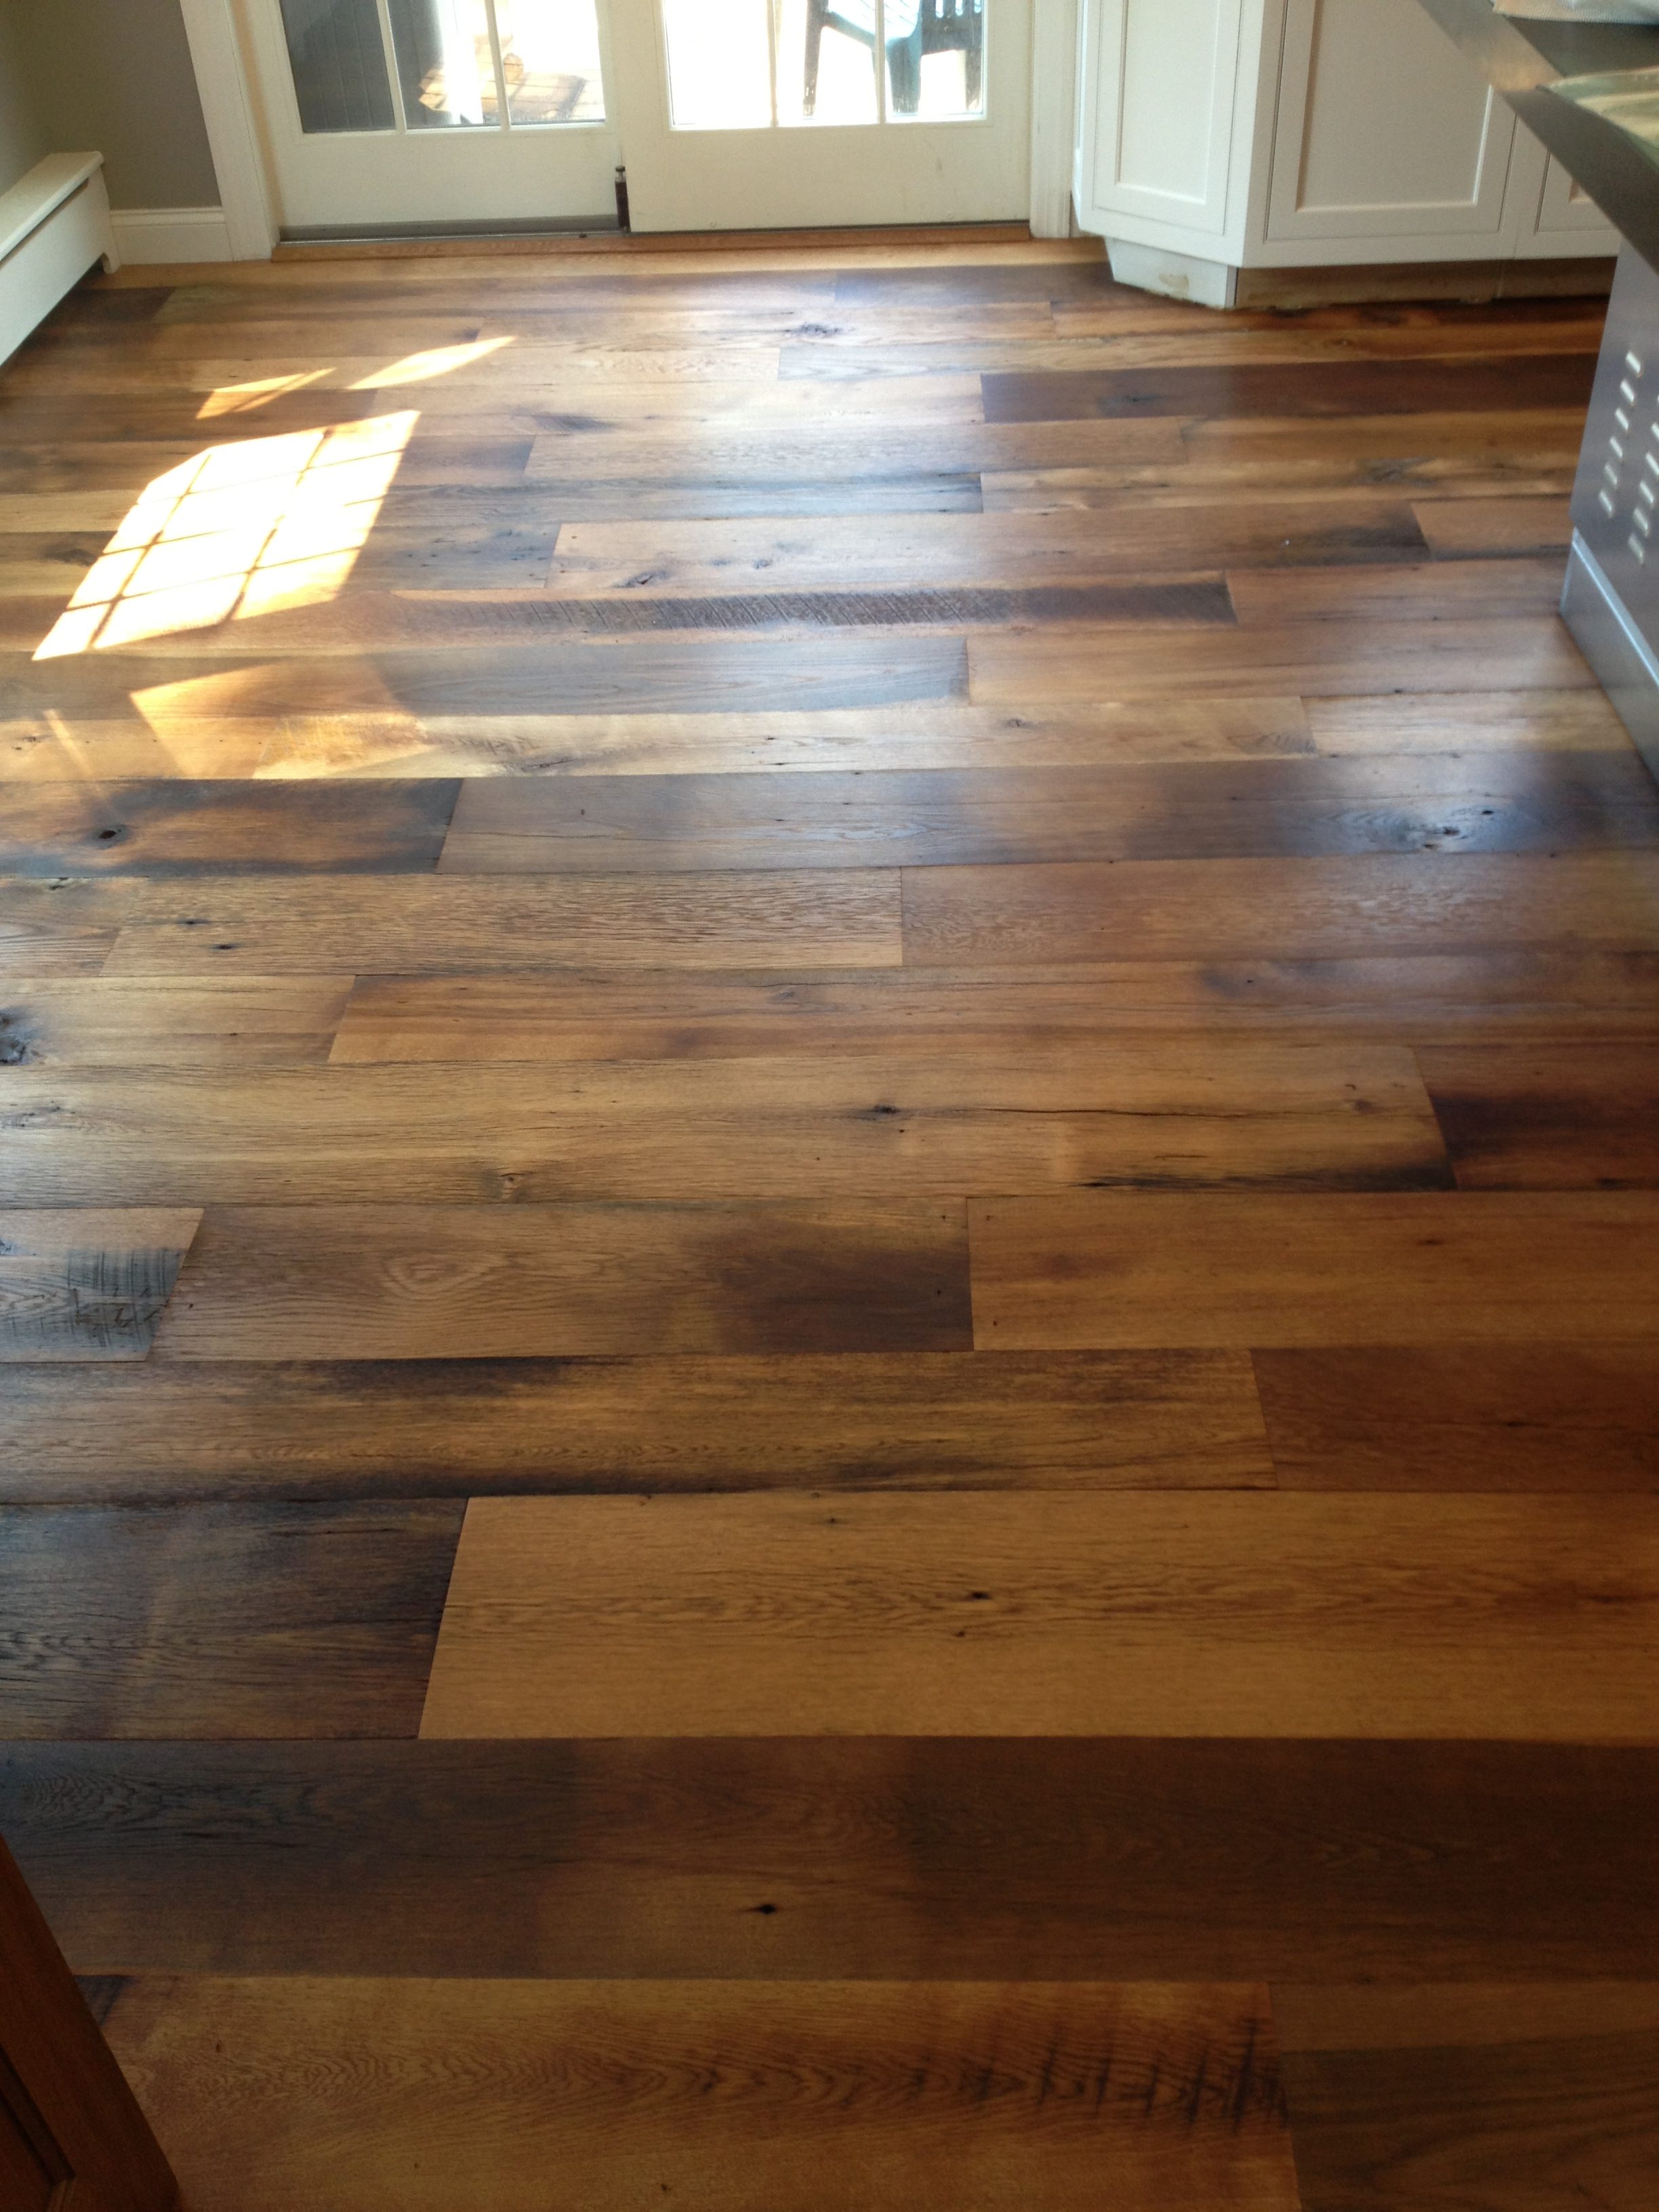 Our Rubio Monocoat Floors: One Year Later - Blake Hill House